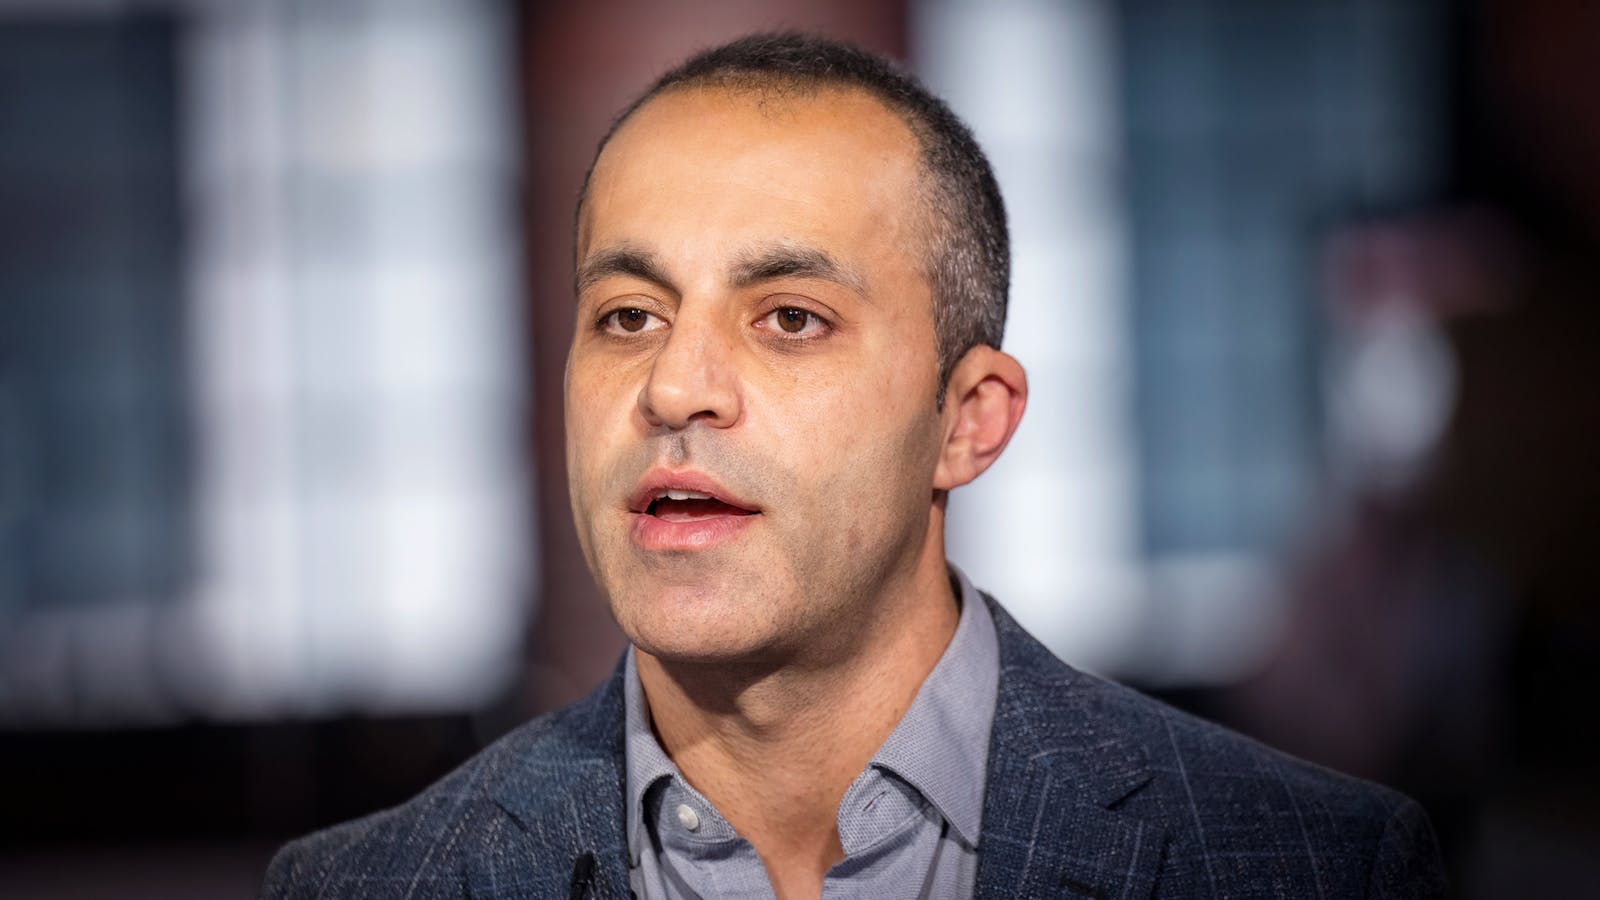 Databricks co-founder and CEO Ali Ghodsi. Photo by Bloomberg.